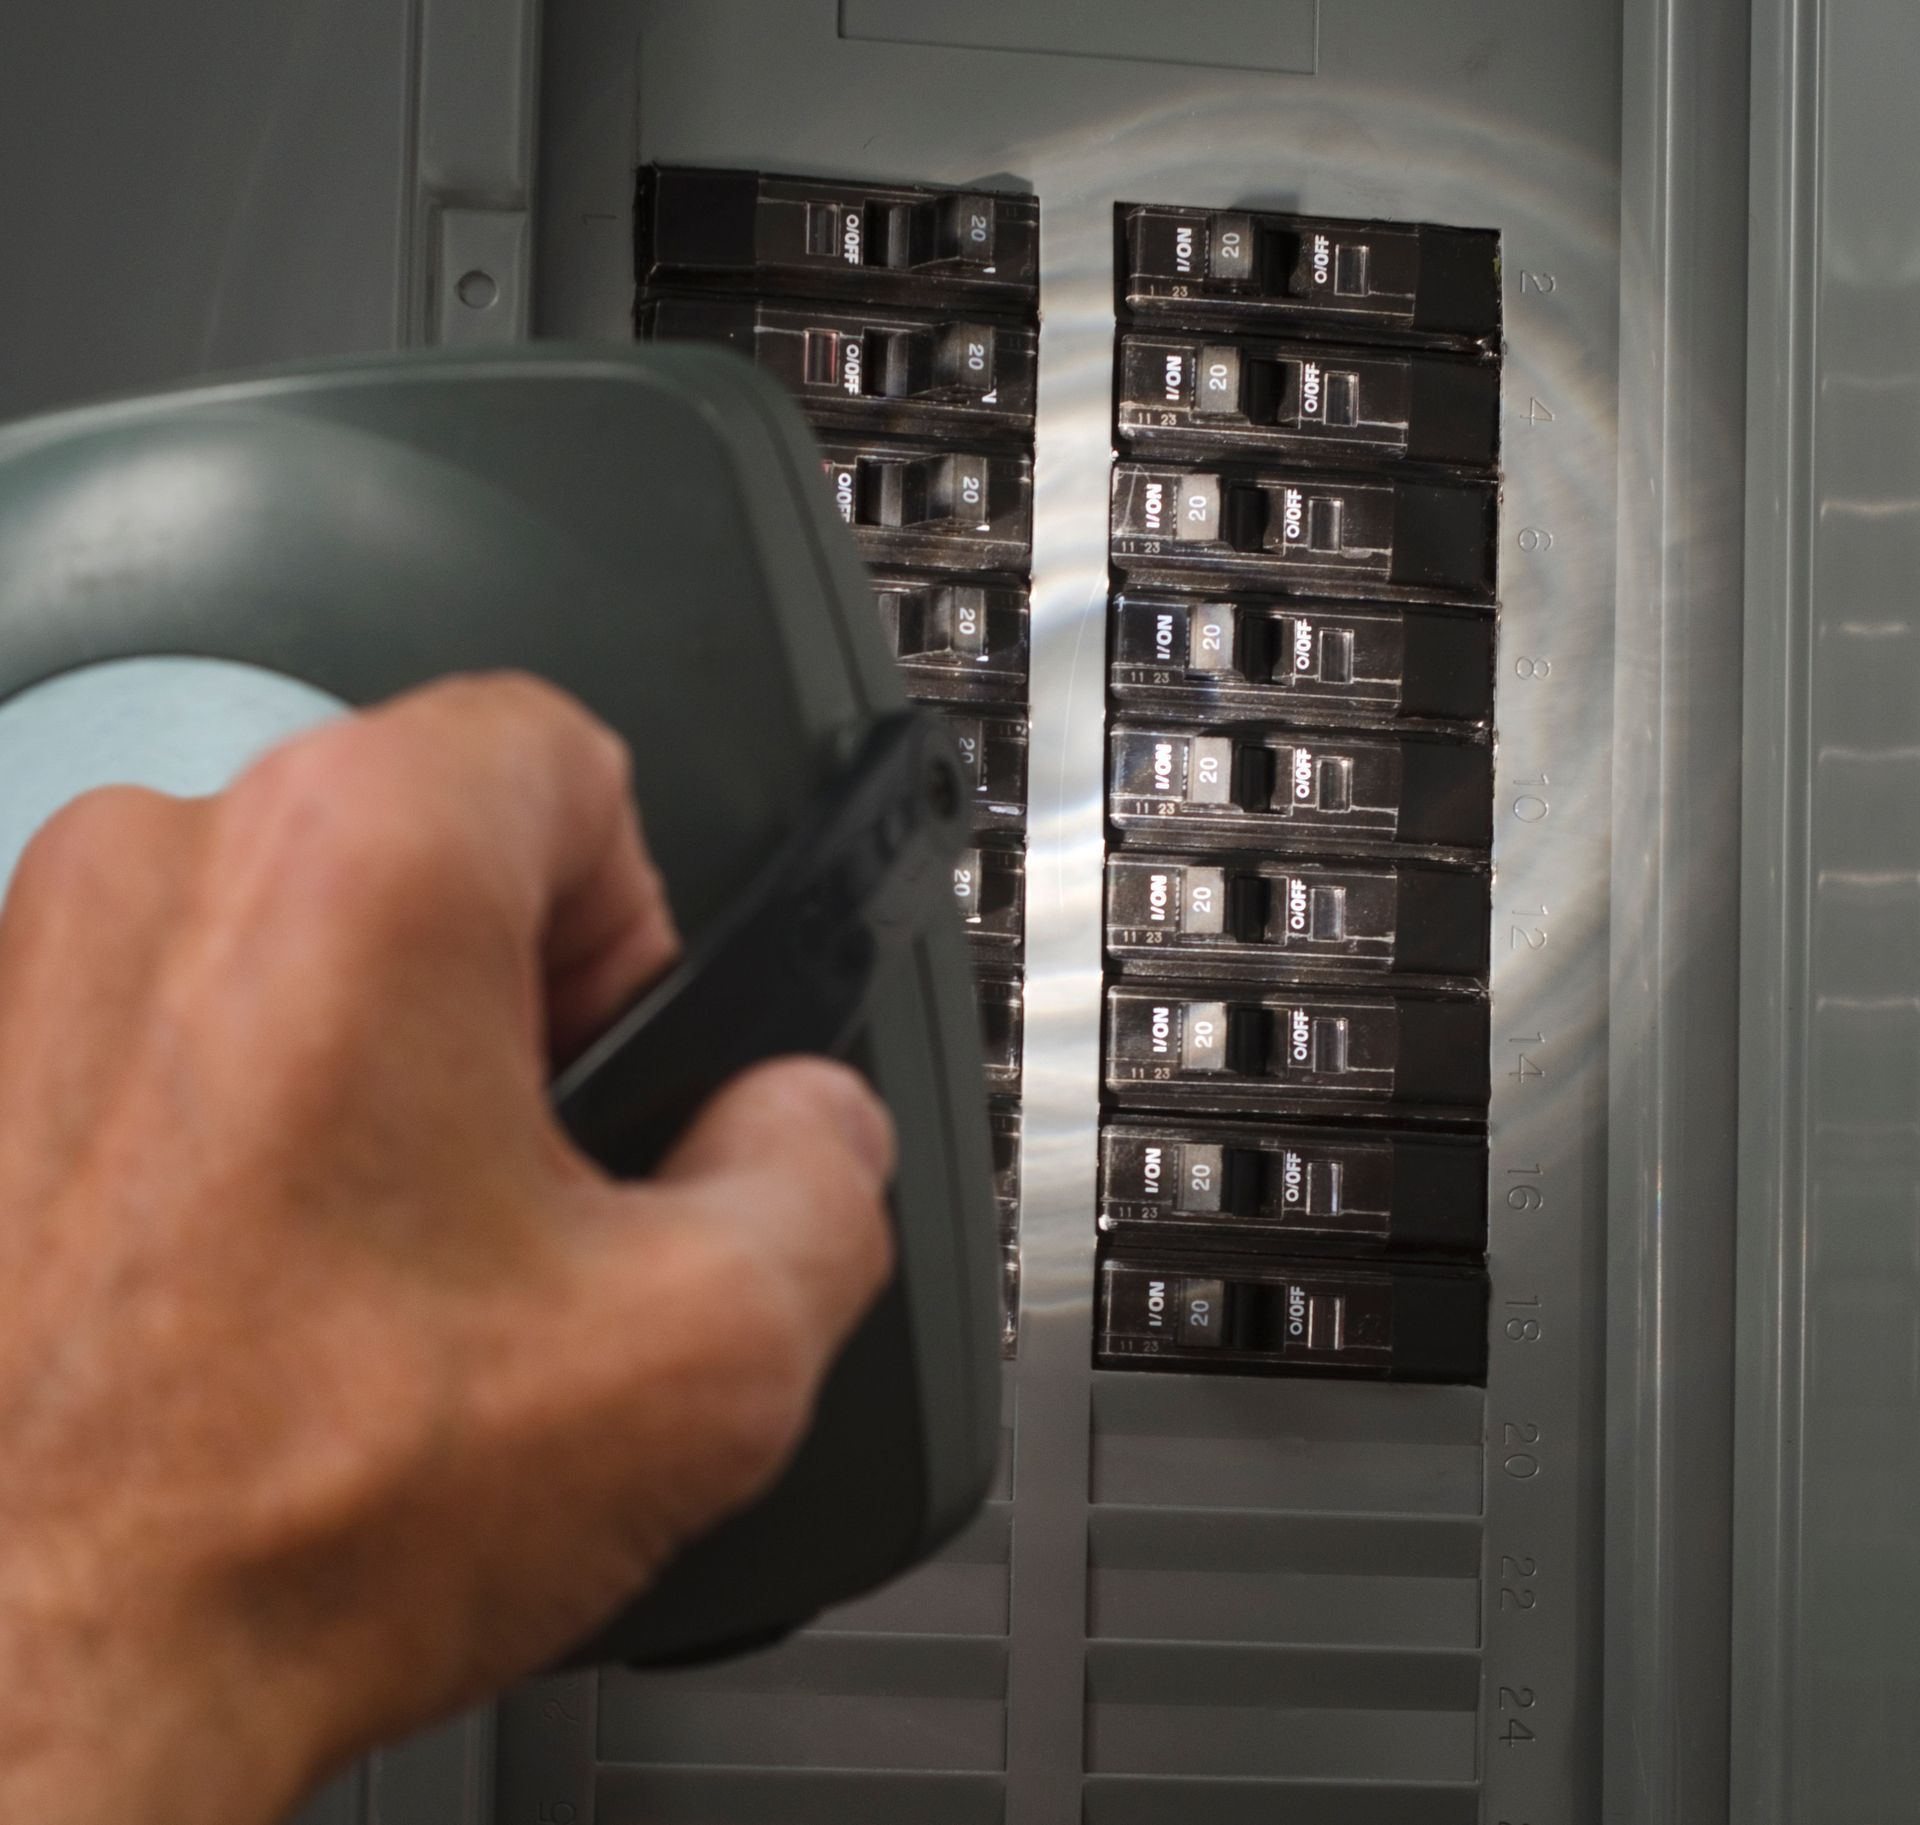 A person is holding a flashlight in front of a electrical panel.